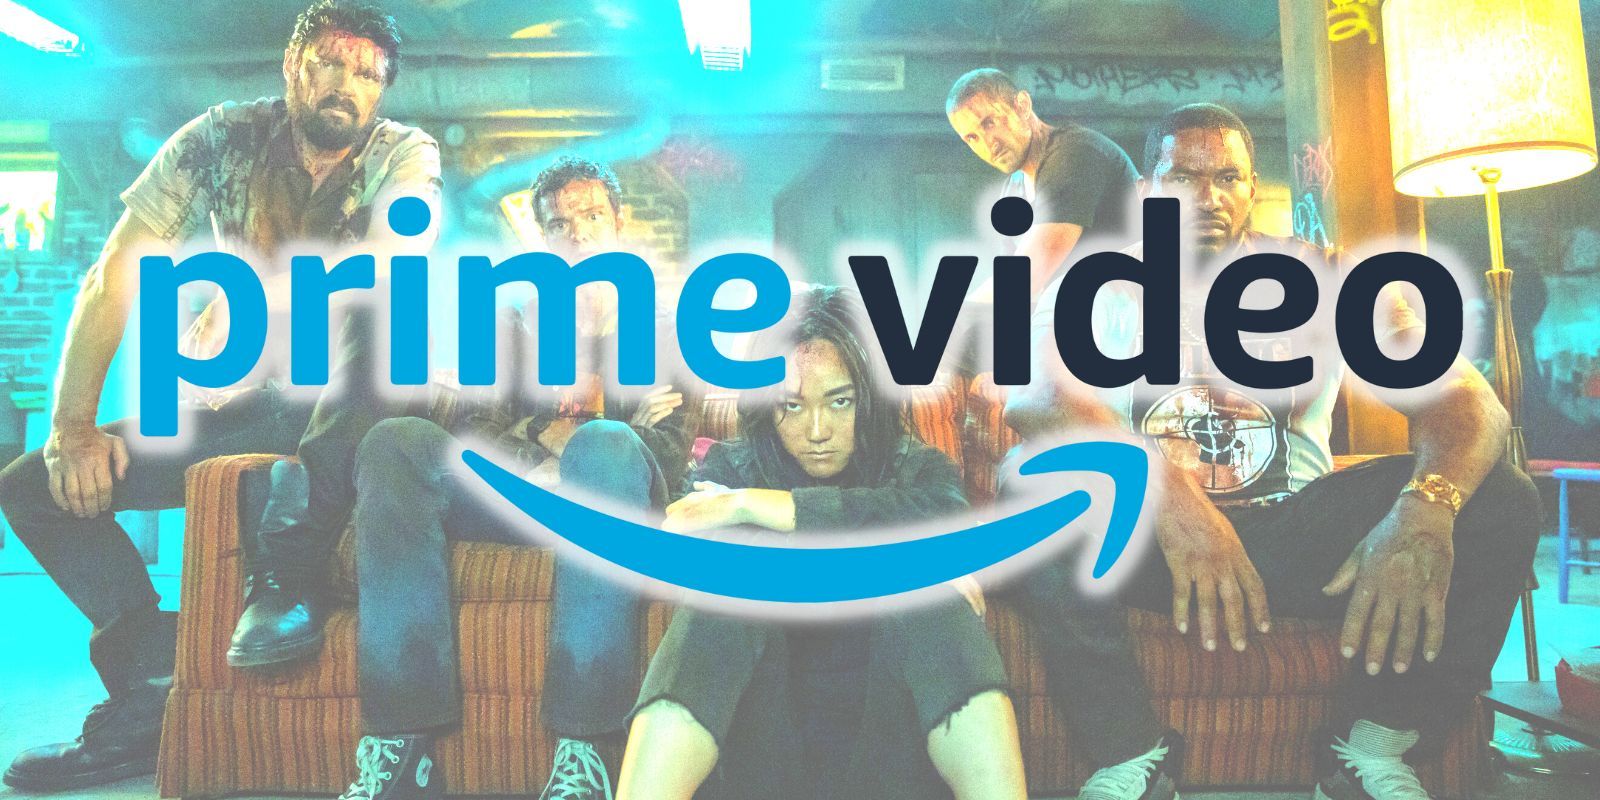 The cast of The Boys sitting on a couch looking through the Prime Video logo